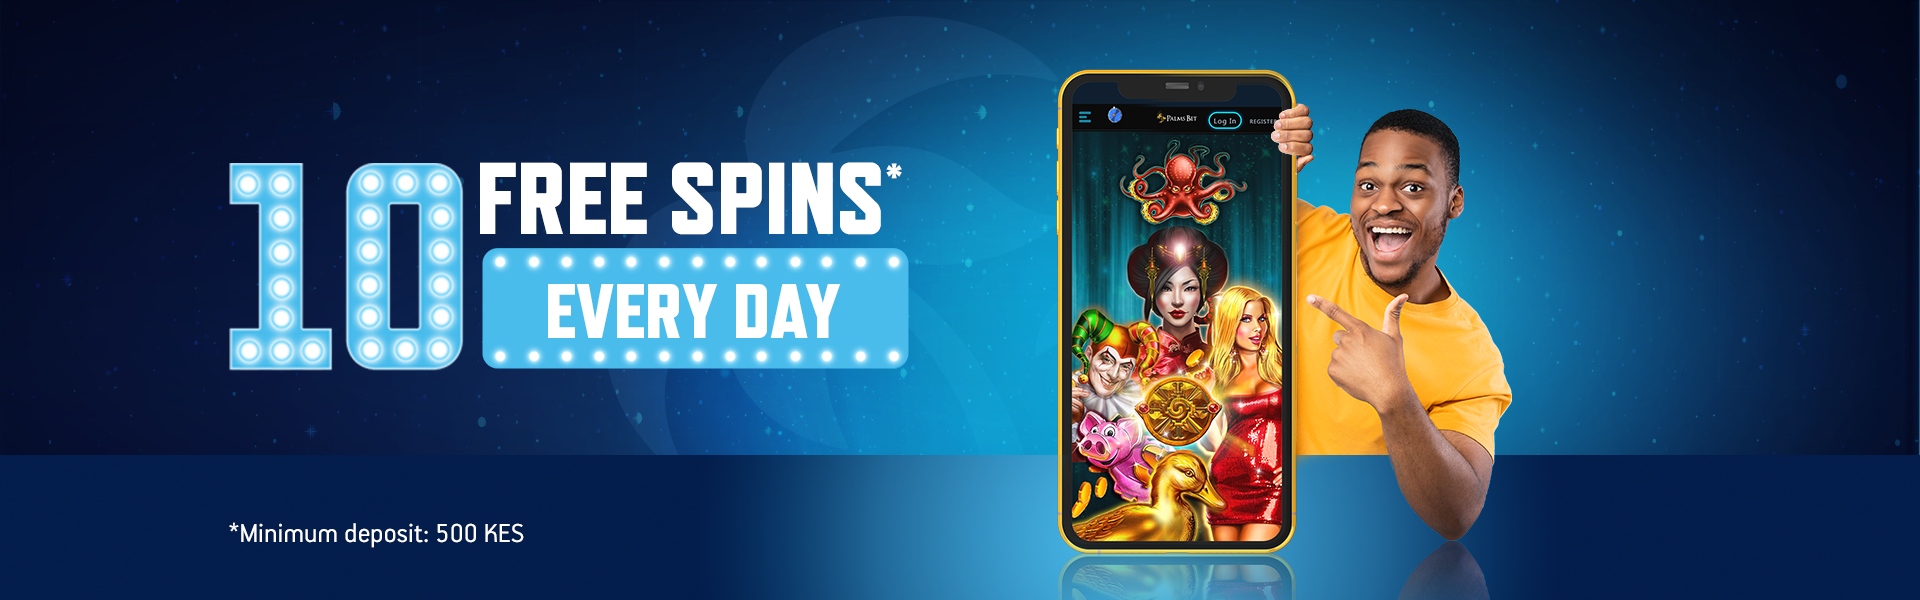 10 free spins every day